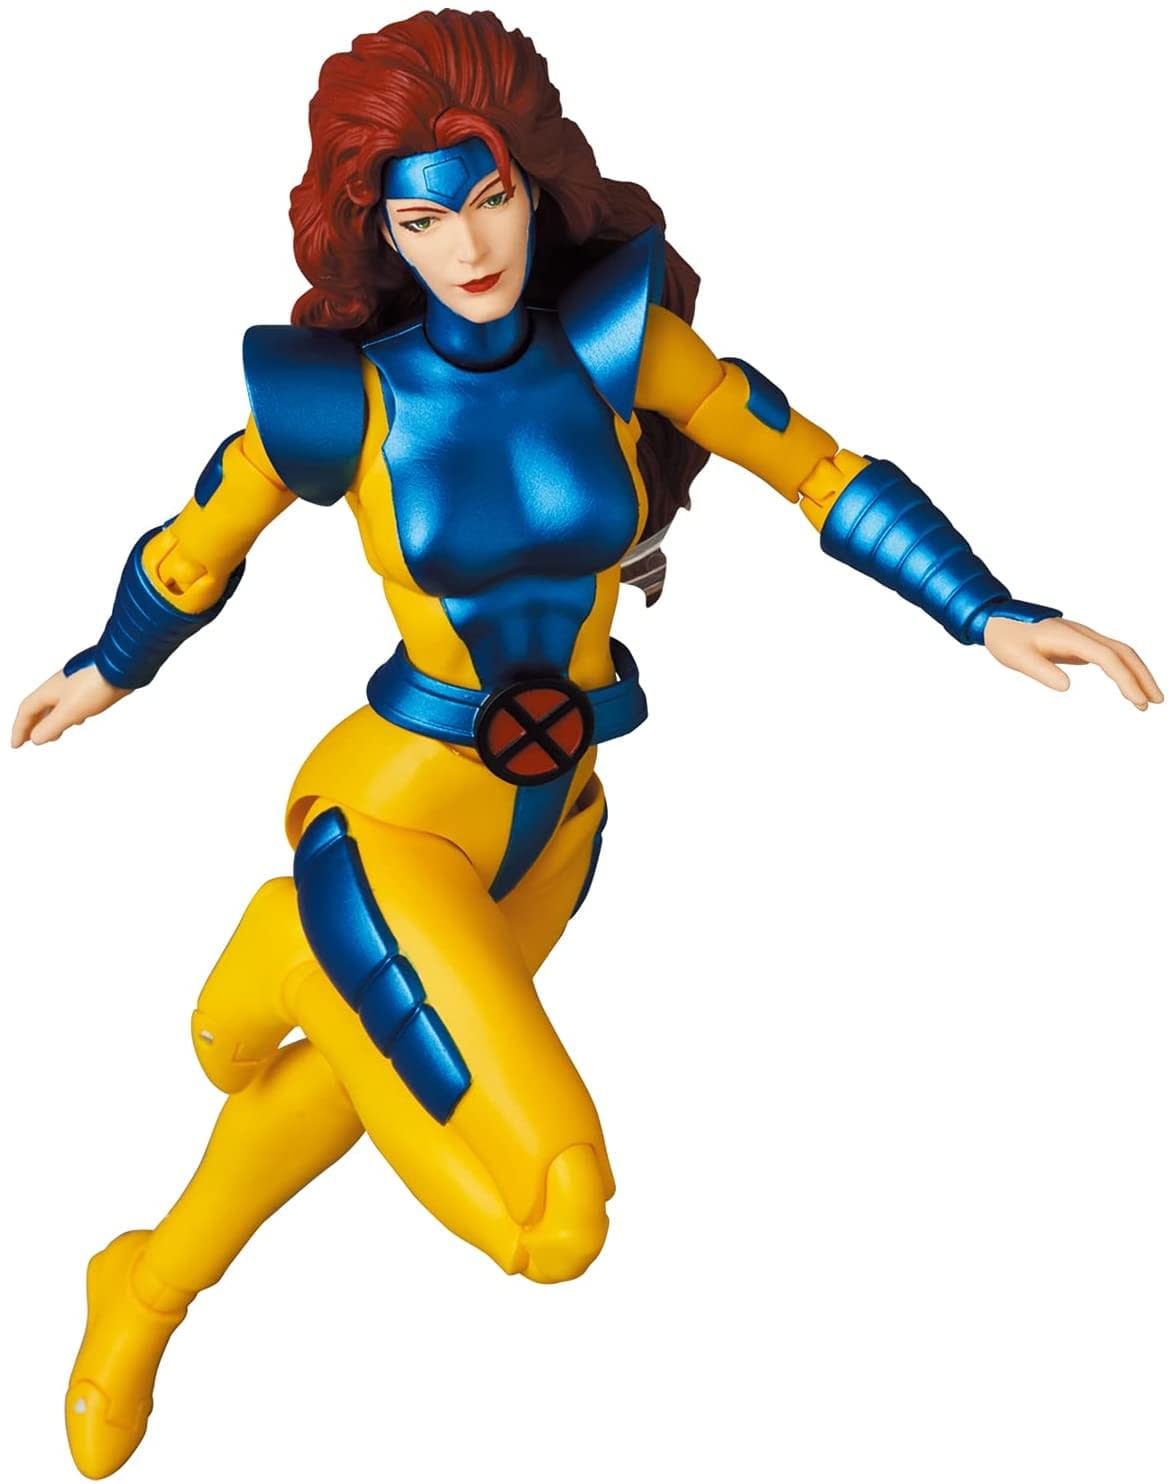 Jean Grey Joins Her Fellow X-Men With New Marvel MAFEX Figure 